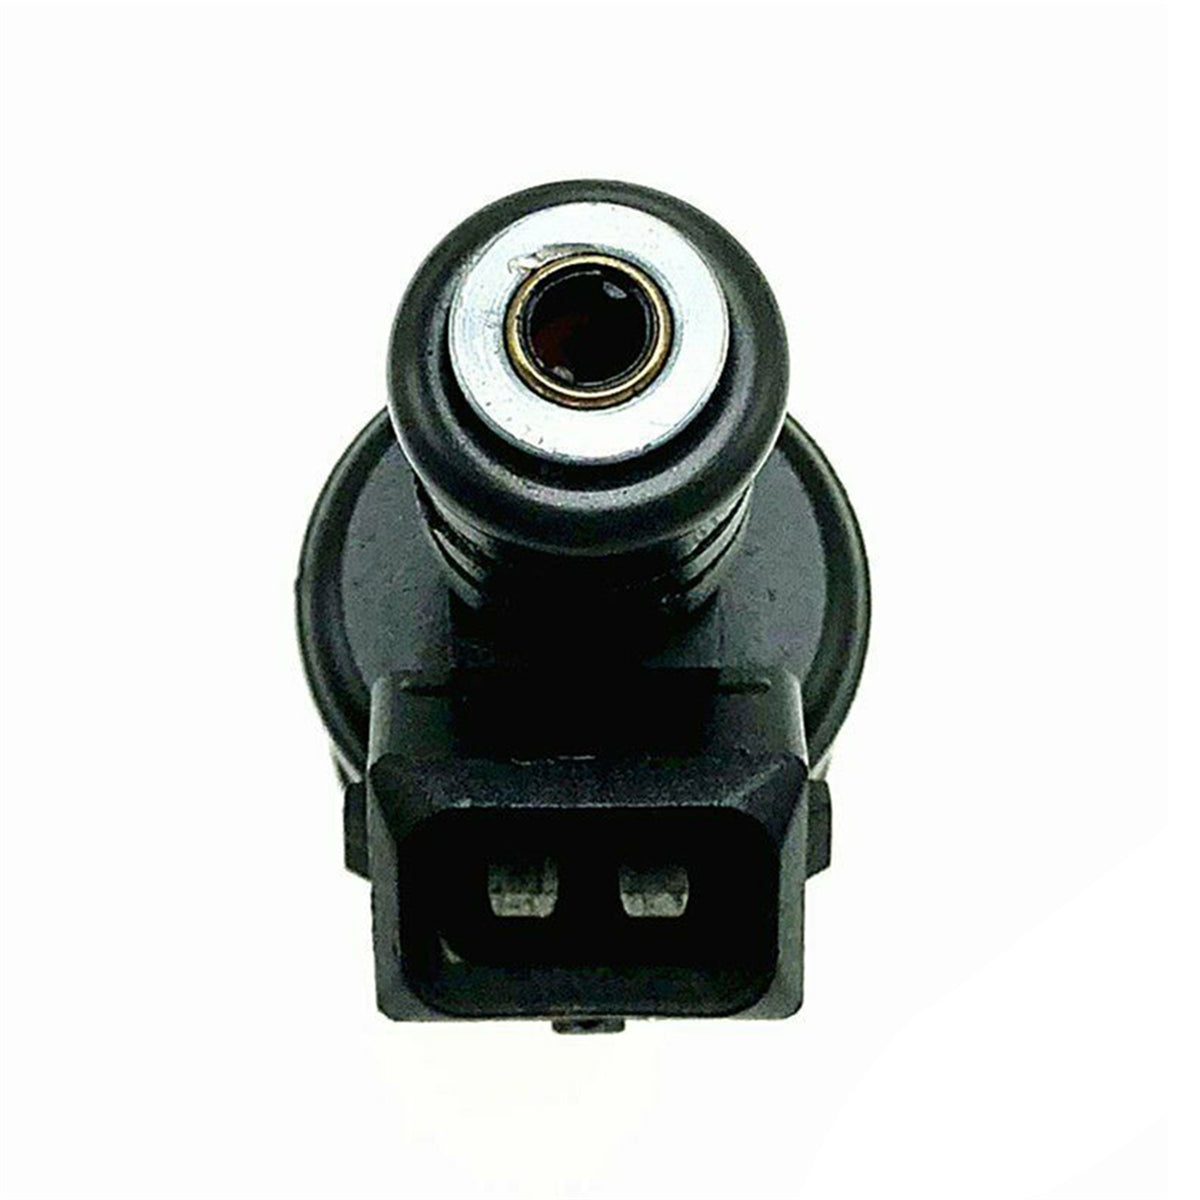 Fuel Injector 0280150790, Fuel Injector for Chevy Holden Commodore, Daysyore Fuel Injector, Car Fuel Injector, Auto Fuel Injector